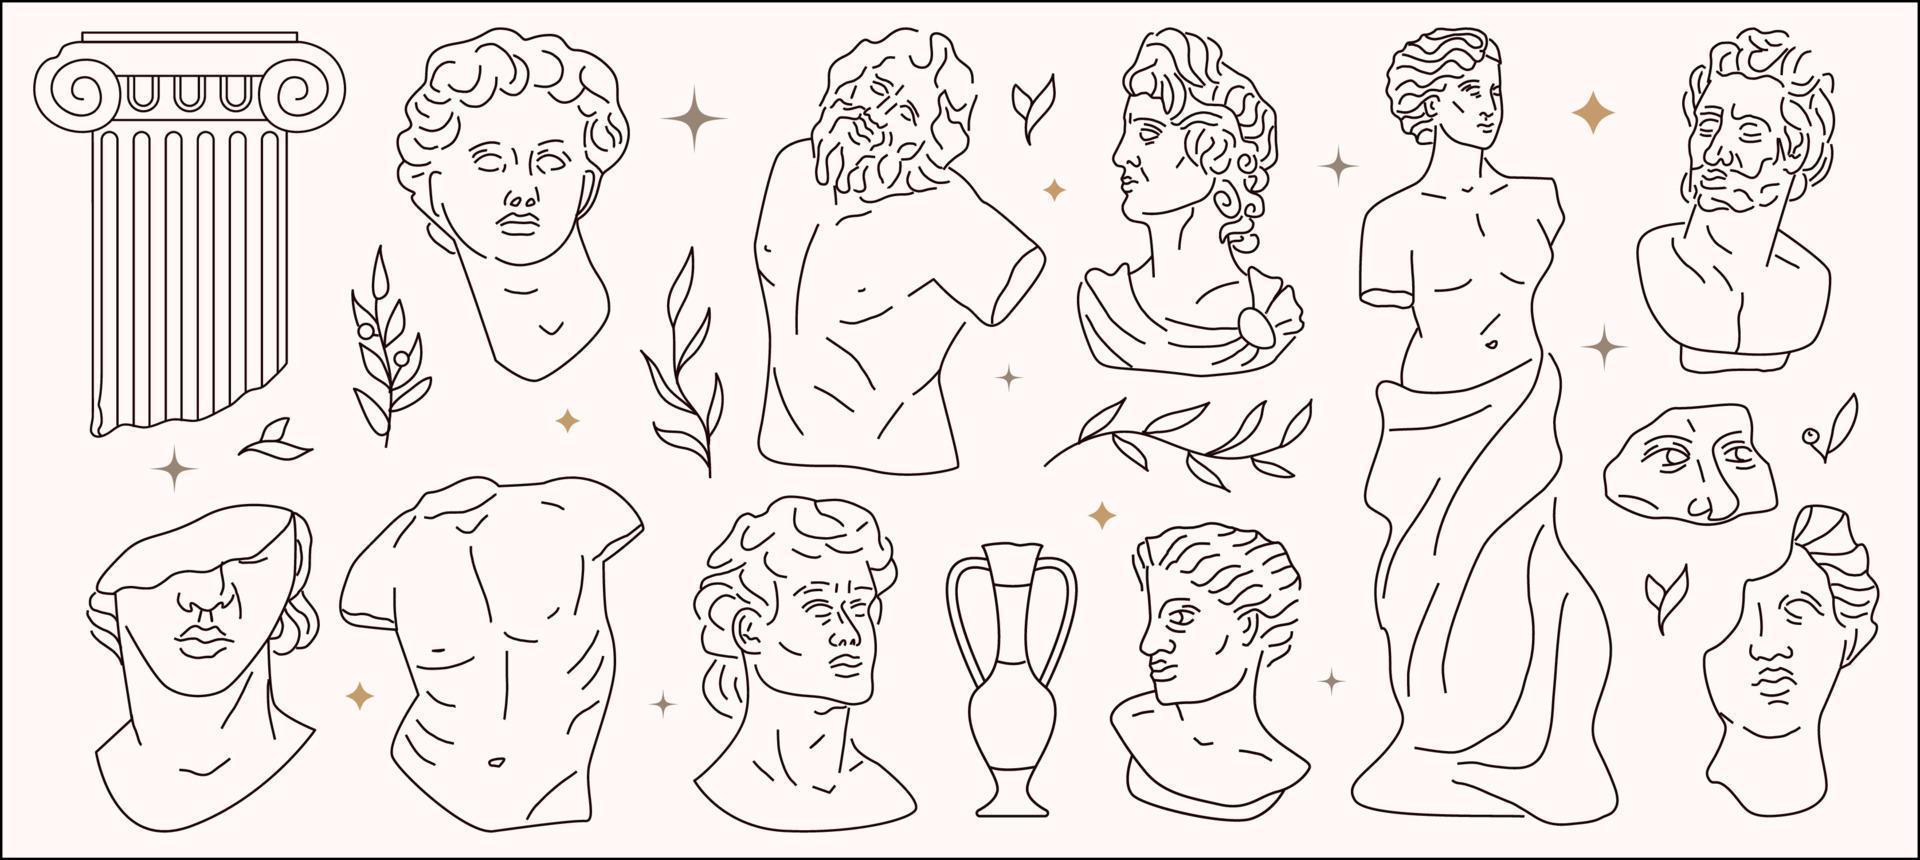 Antique hand-drawn sculptures. Traditional greek style figures, bust and statues, column. Architectural elements, gods and mythology, ancient graphic design elements. vector